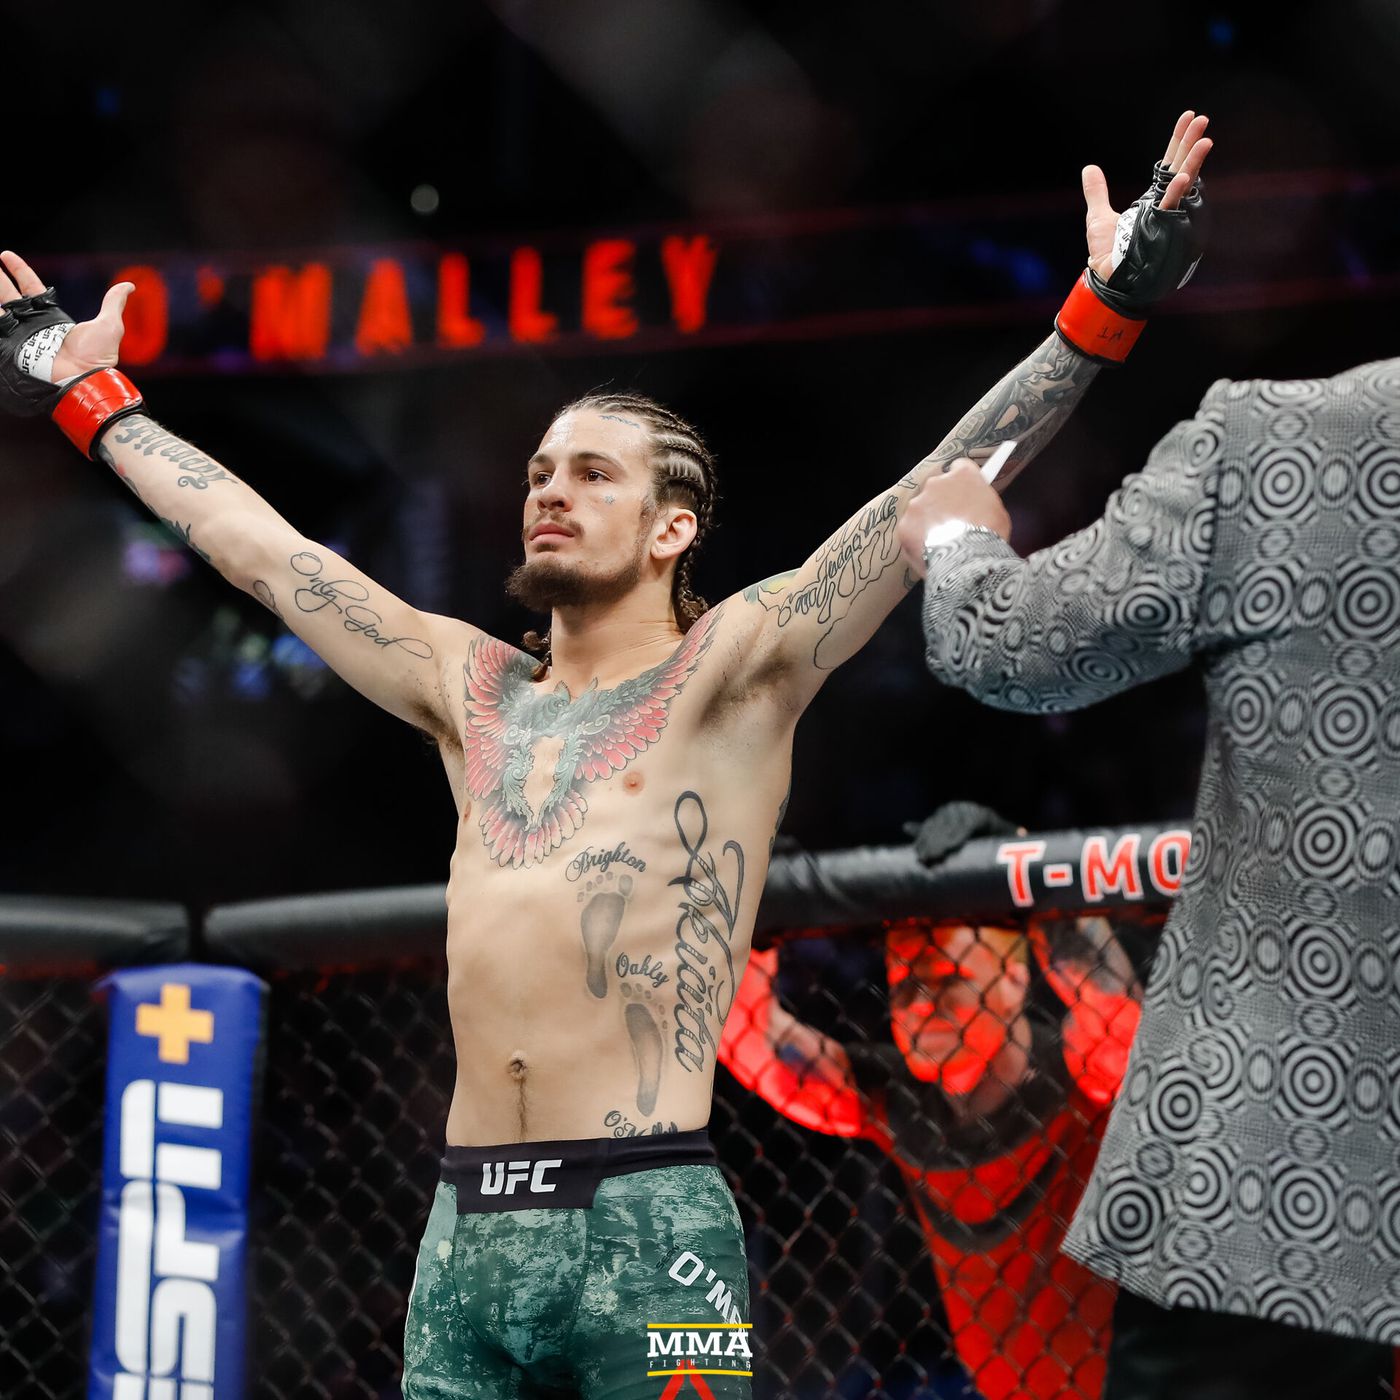 Morning Report: Sean O'Malley squashes beef with Sean Shelby: 'I had that conversation and we're good now'